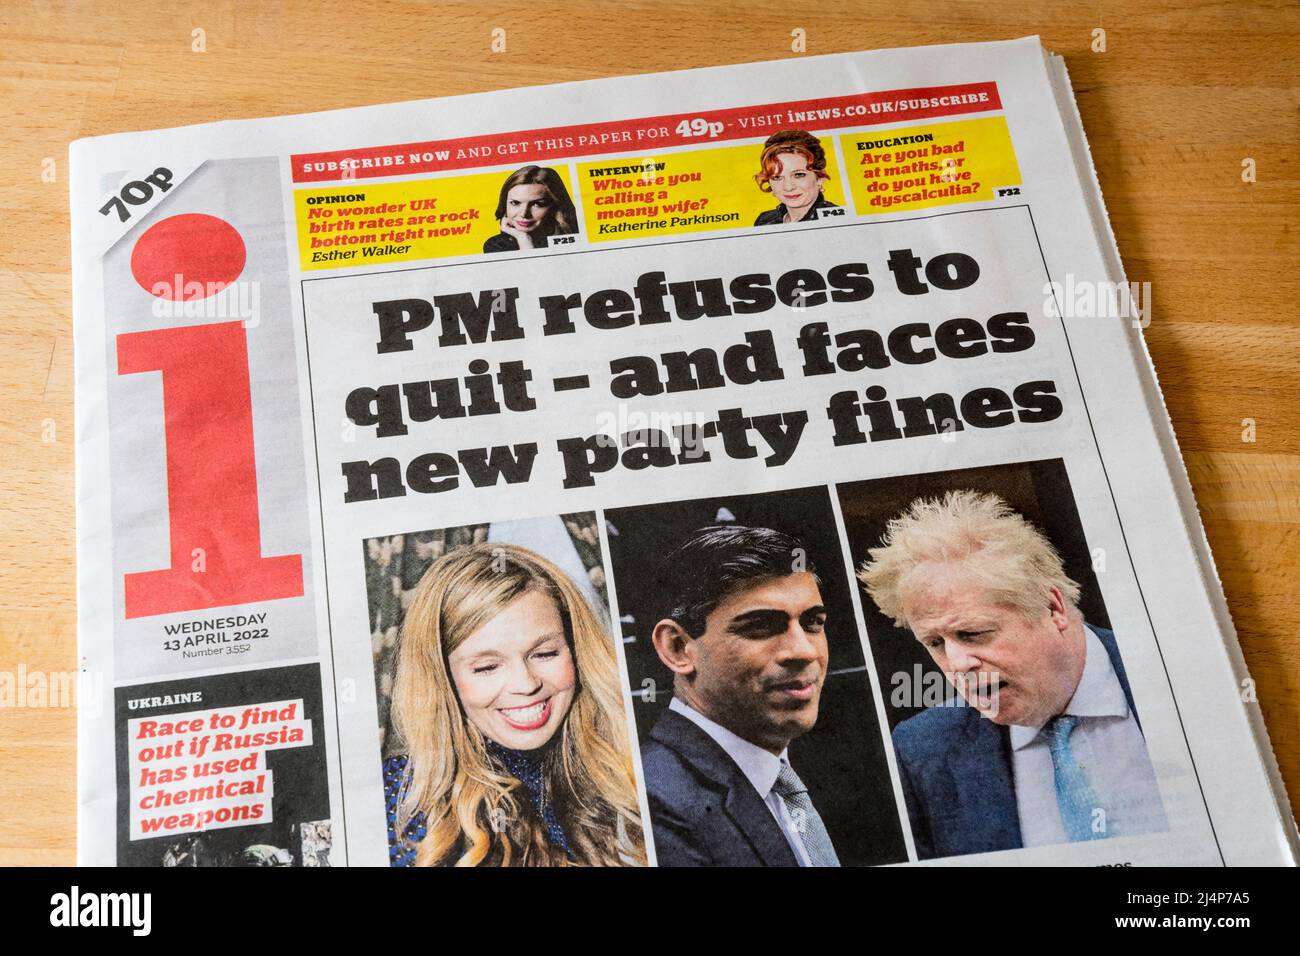 Headline in i newspaper of 13 April reads PM refuses to quit - and faces new party fines. Stock Photo